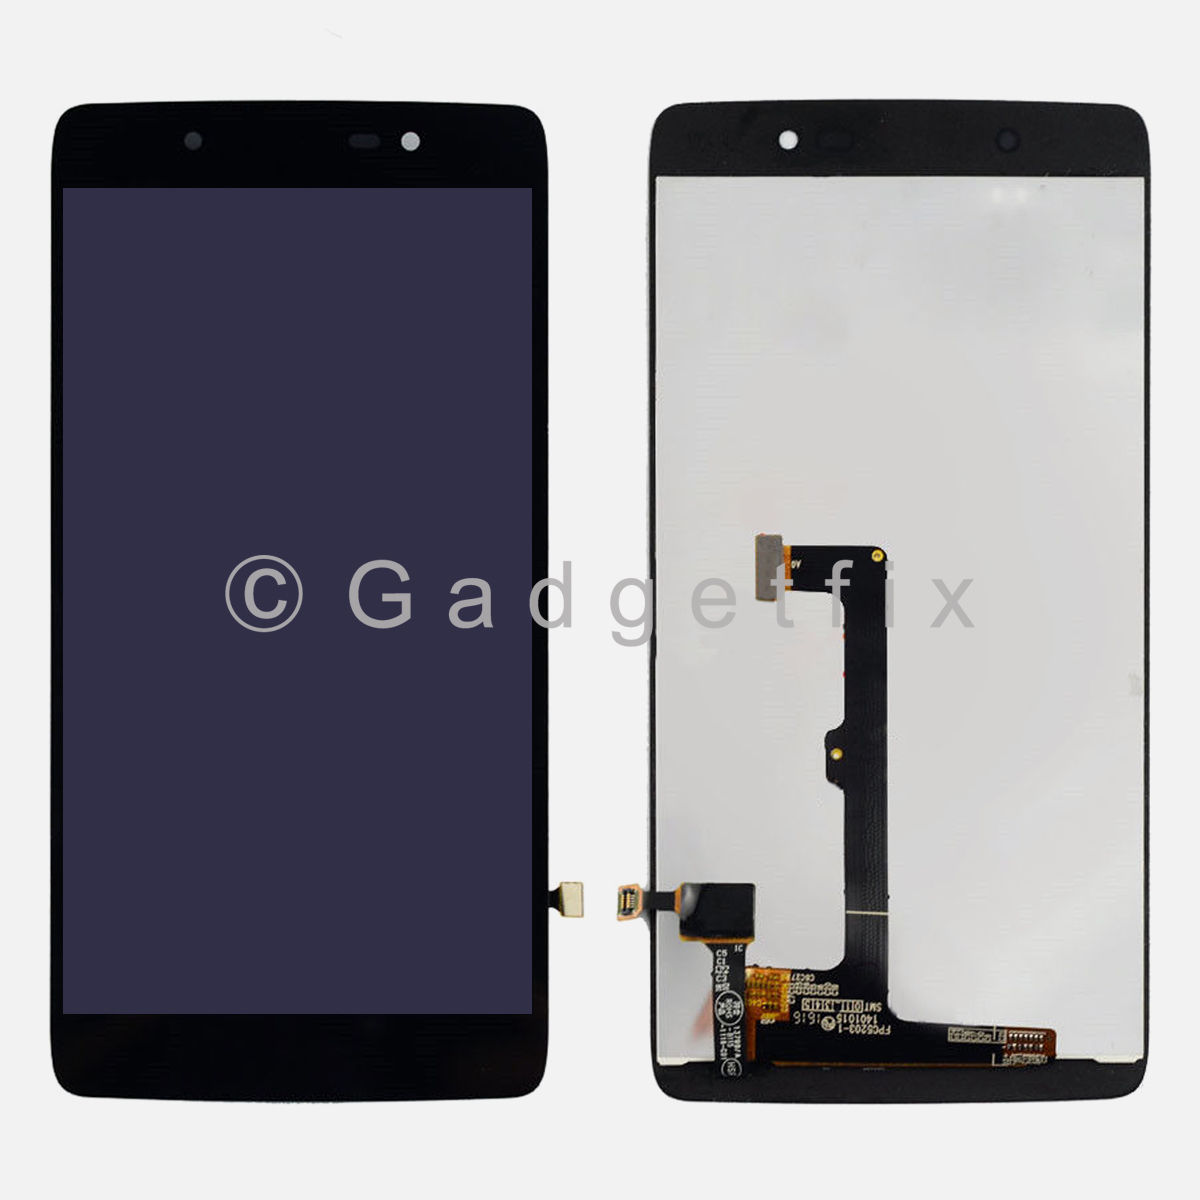 LCD Display Touch Screen Digitizer Assembly Replacement For Blackberry DTEK50